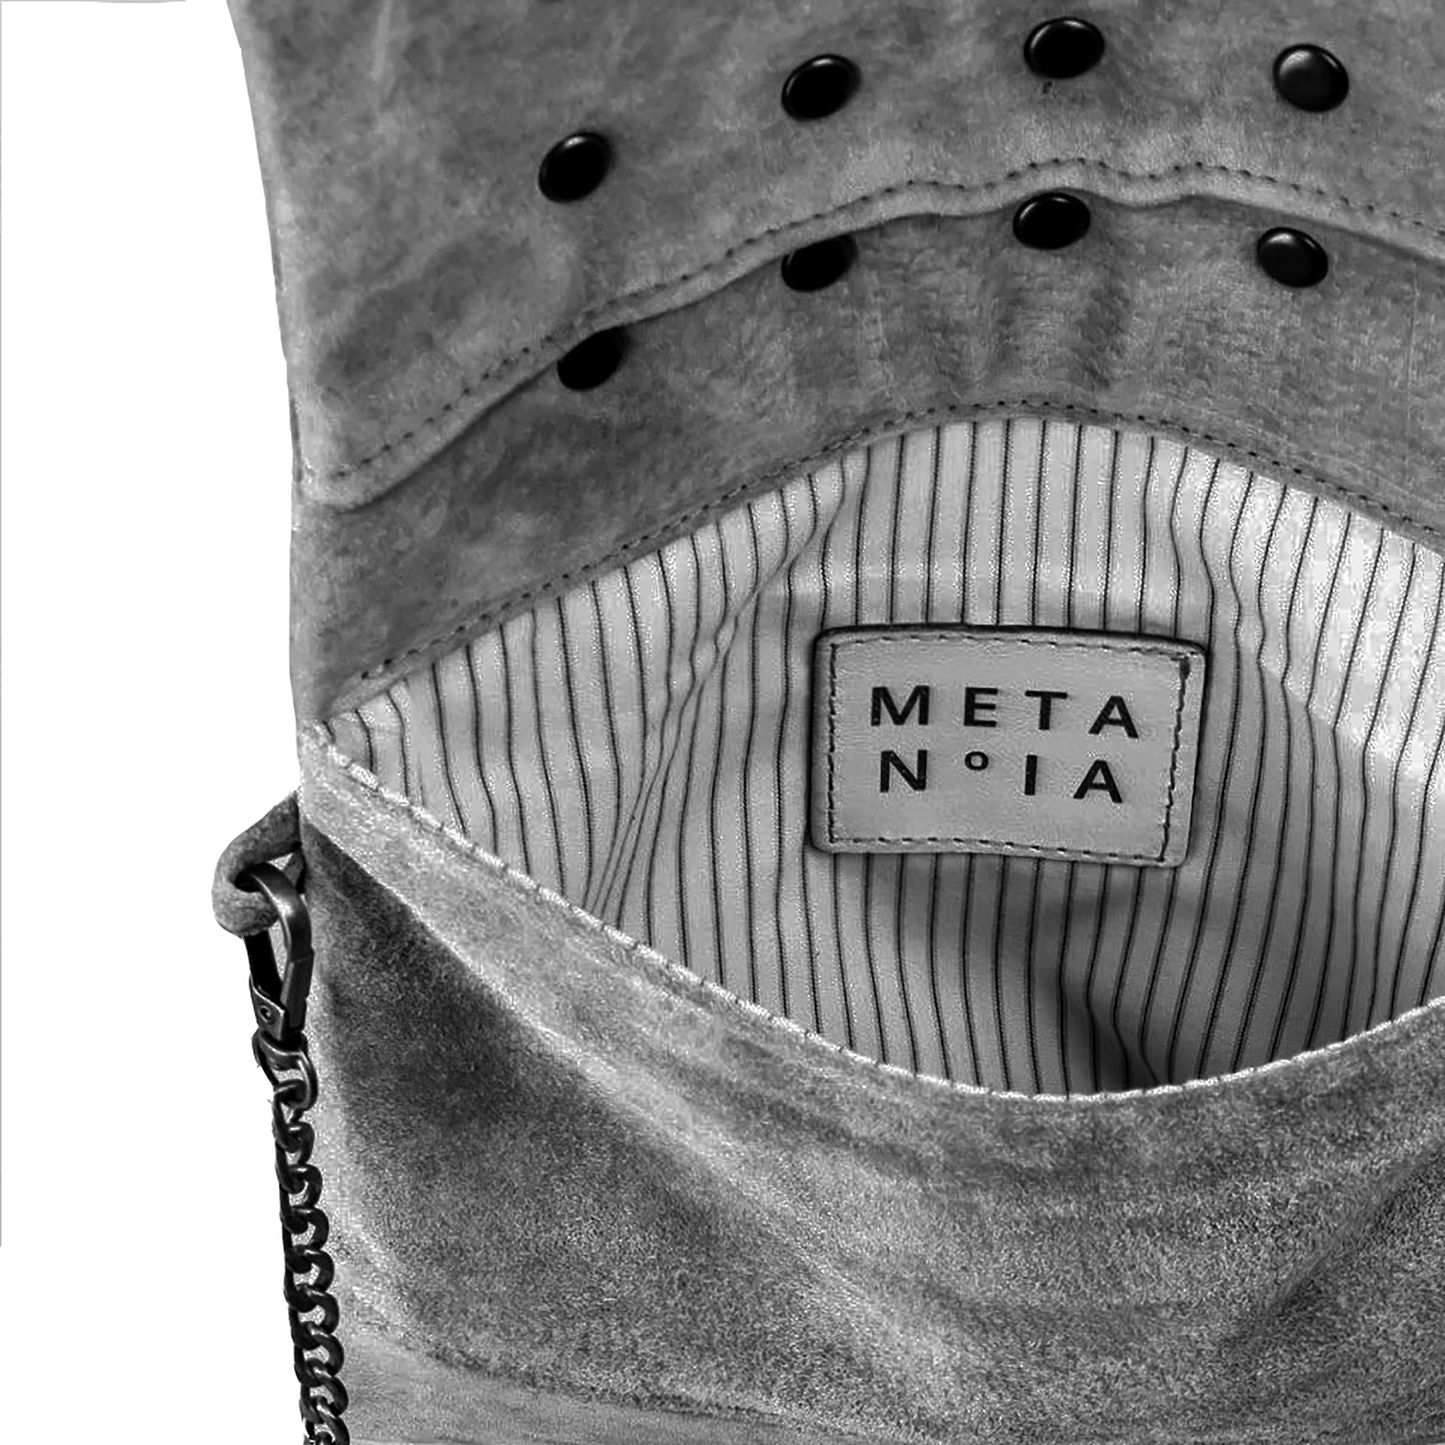 The METANoIA Small Bag inside featuring pinstripe fabric sourced from recycled fabric and a caramel leather woven label lasered with the iconic METANoIA label.